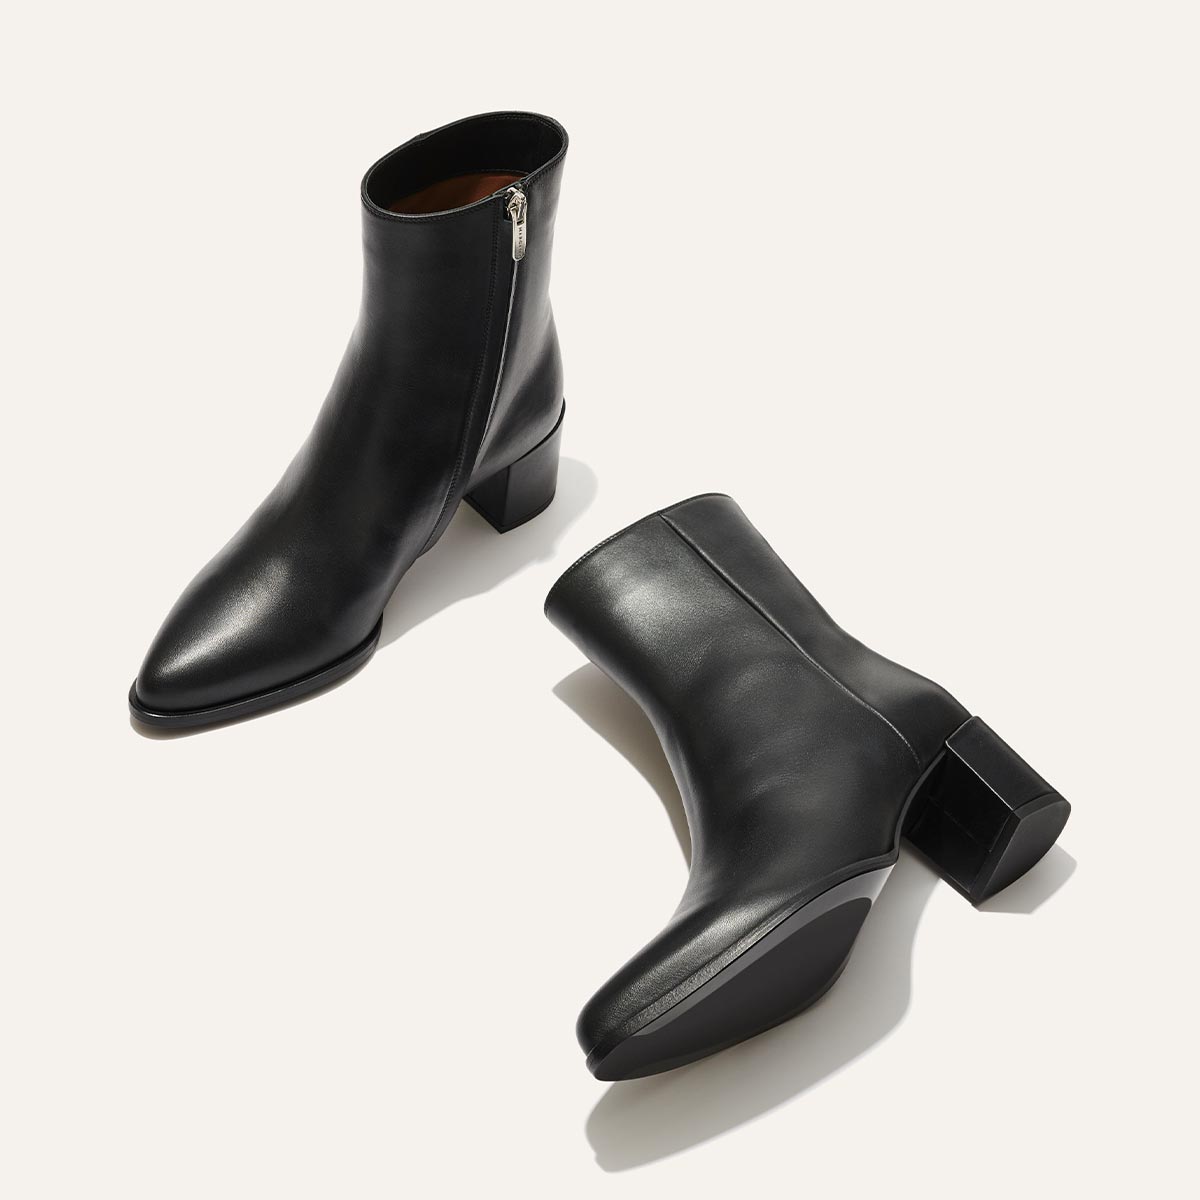 The Downtown Boot - Black Calf